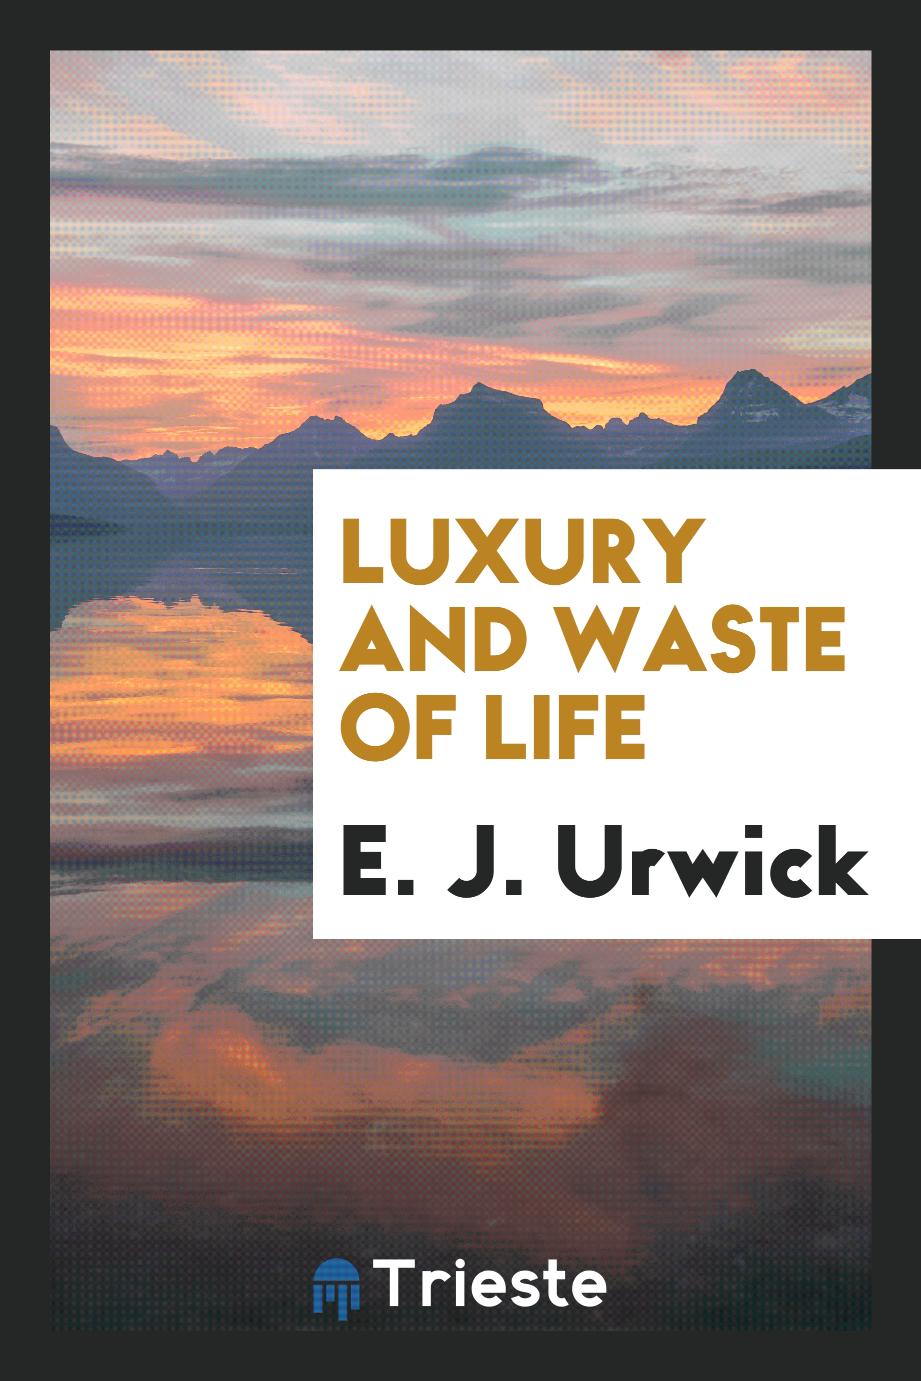 Luxury and waste of life